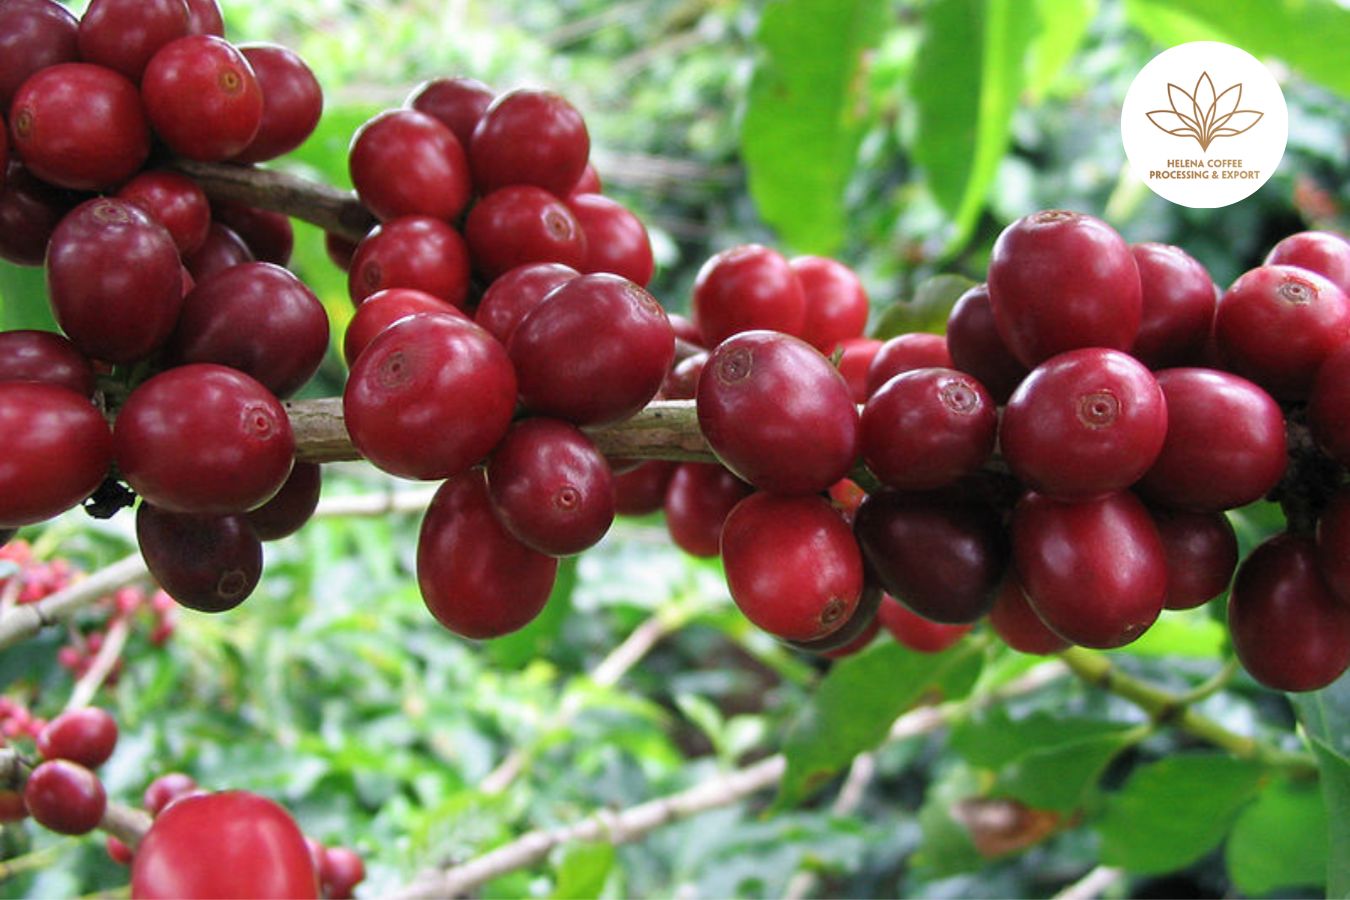 Typica Coffee – What Makes A Great Cup Of Coffee?